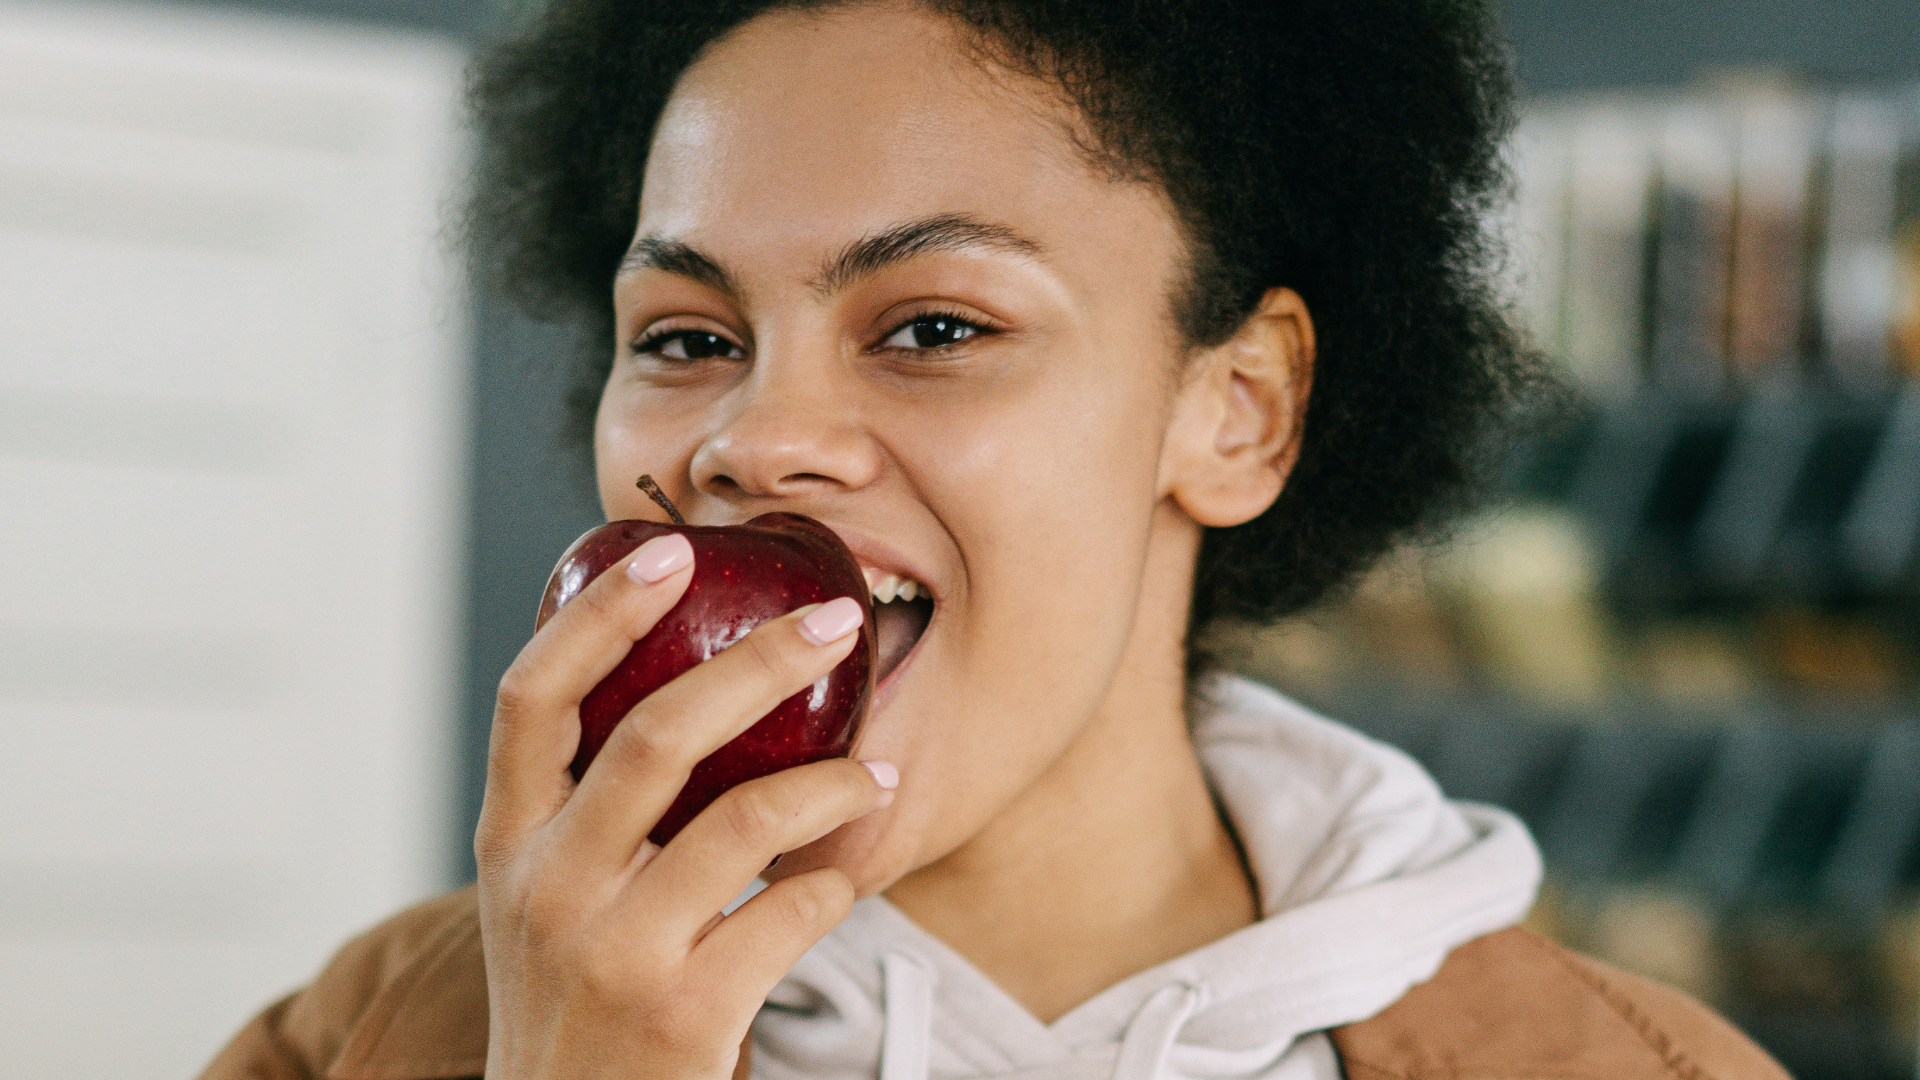 Tooth Tips | 3 Snack Options for Healthy Teeth